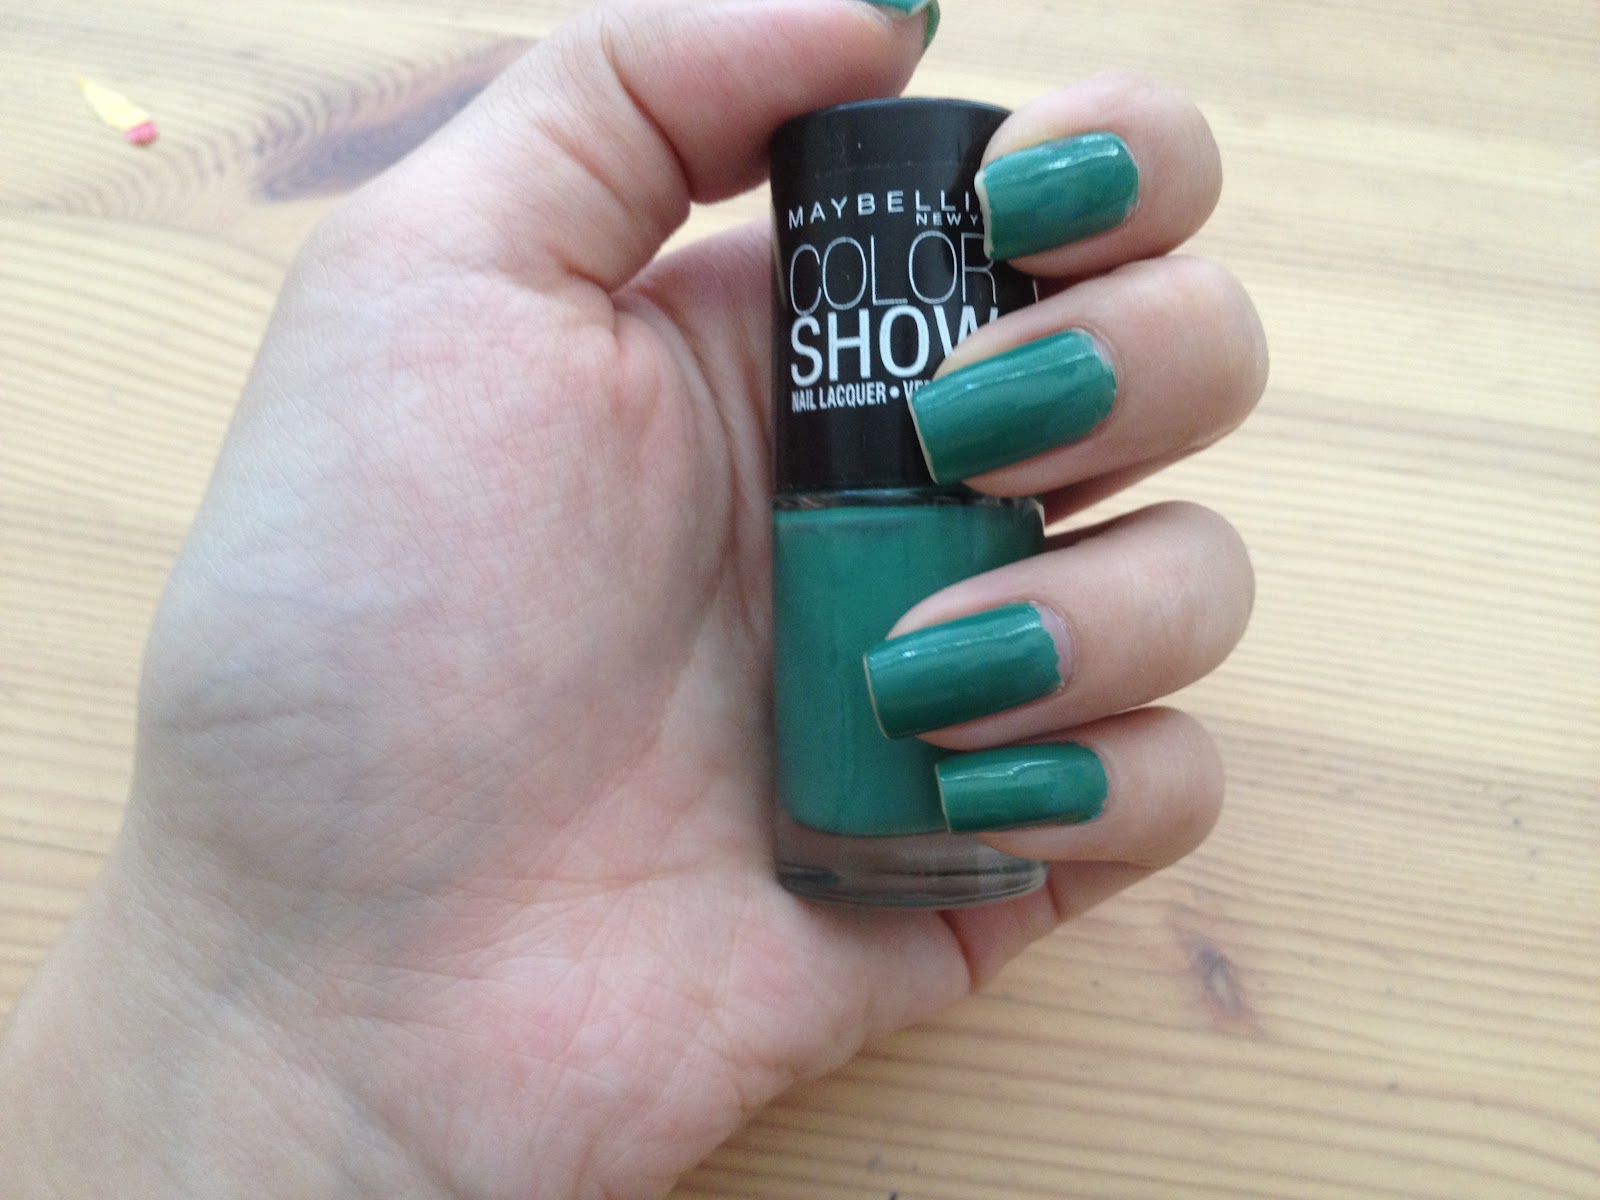 8. Maybelline Color Show Nail Lacquer in Bold Gold - wide 2